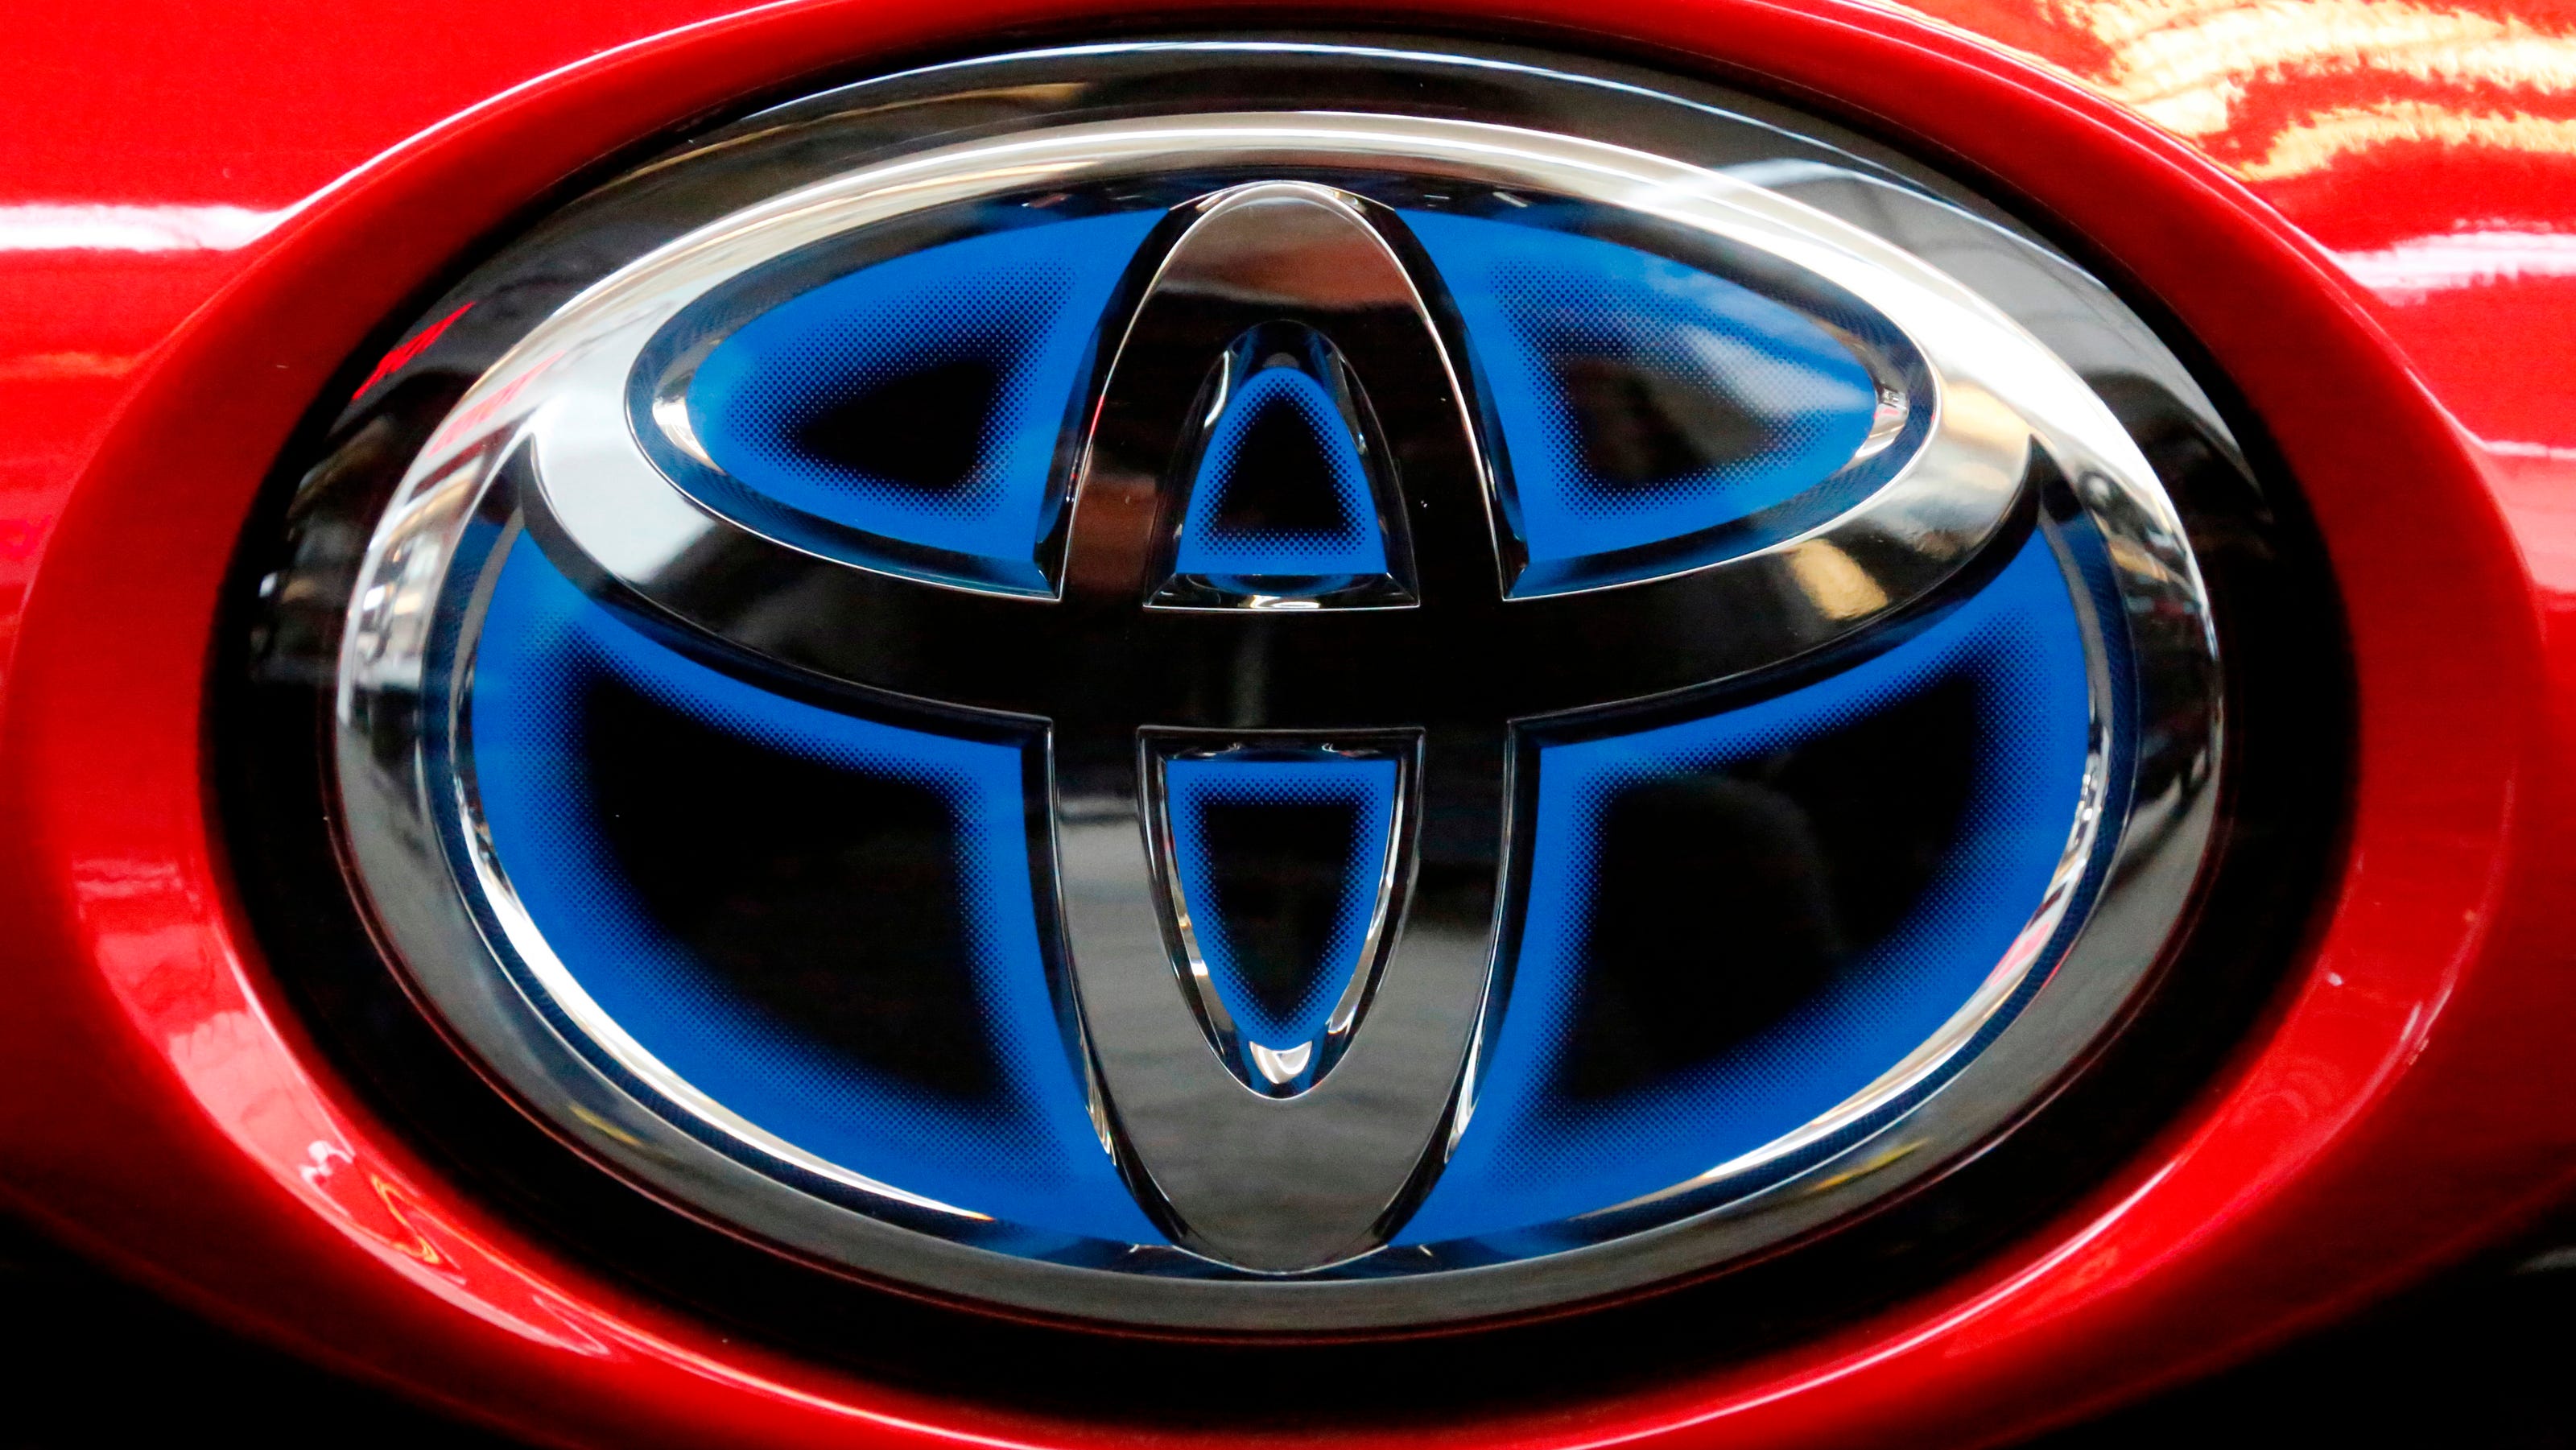 Toyota Fuel Pump Recall 2020 1 2 Million More Cars Recalled